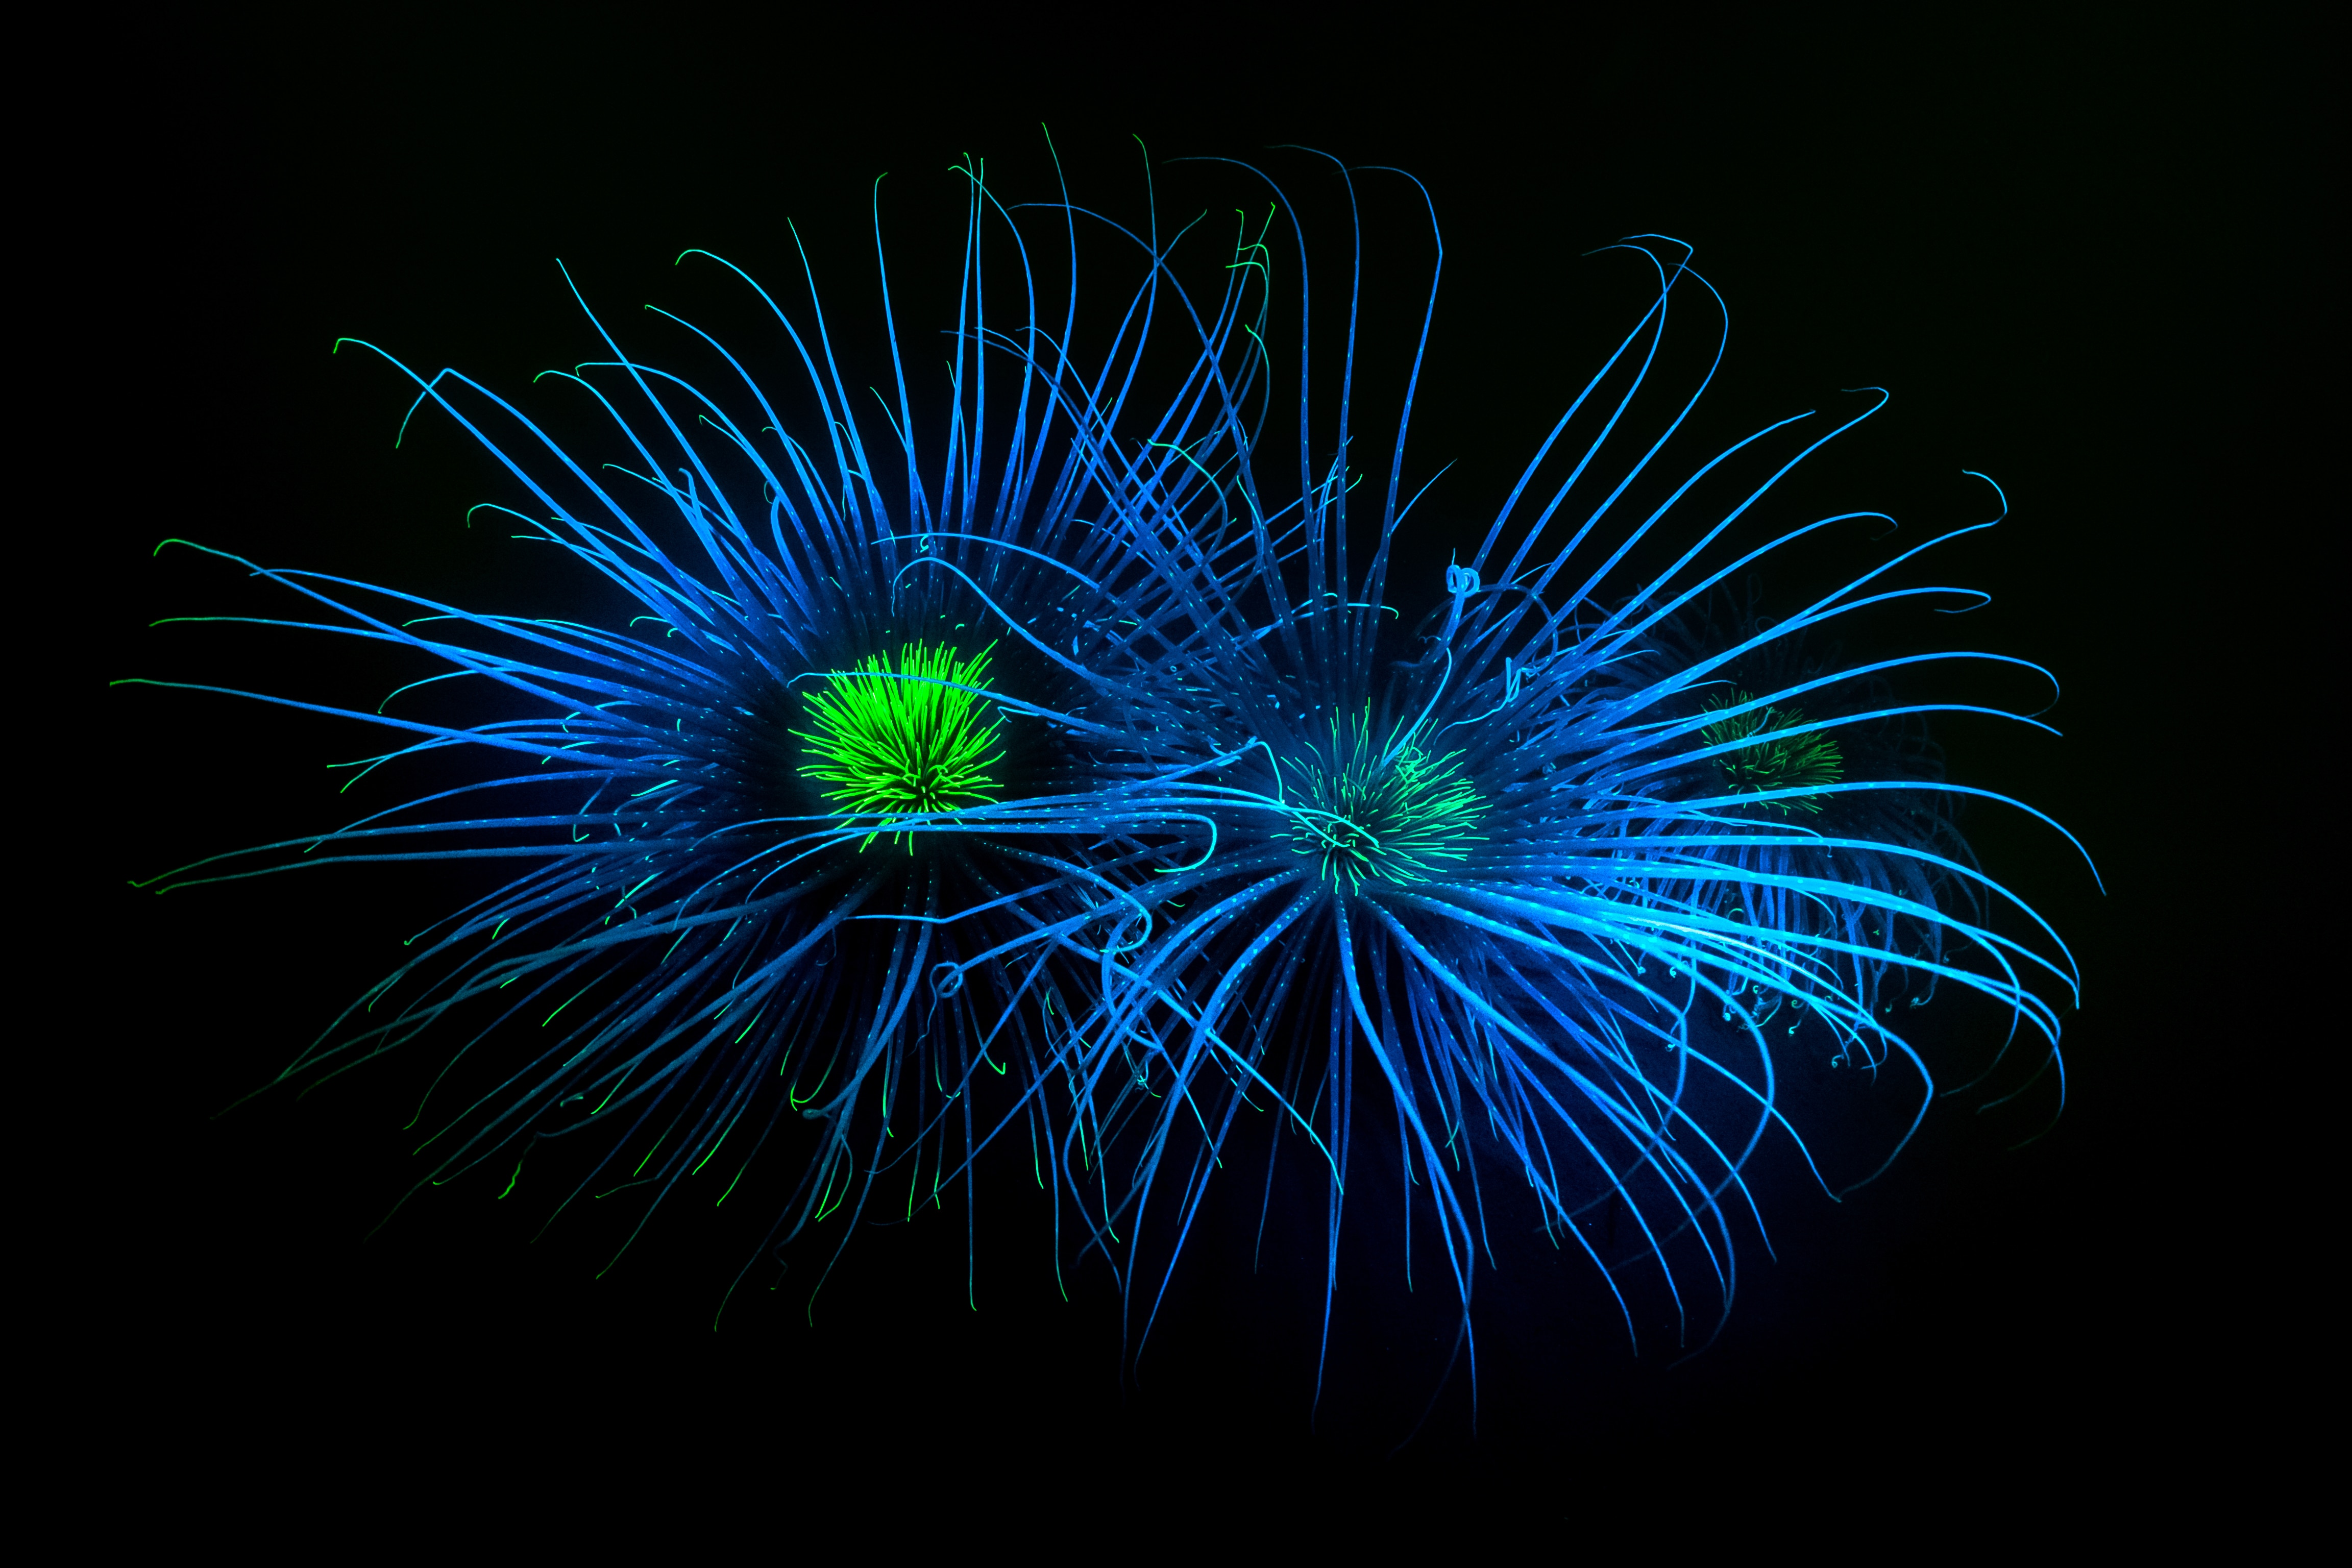 An image of  blue and green fireworks anemone against a black background